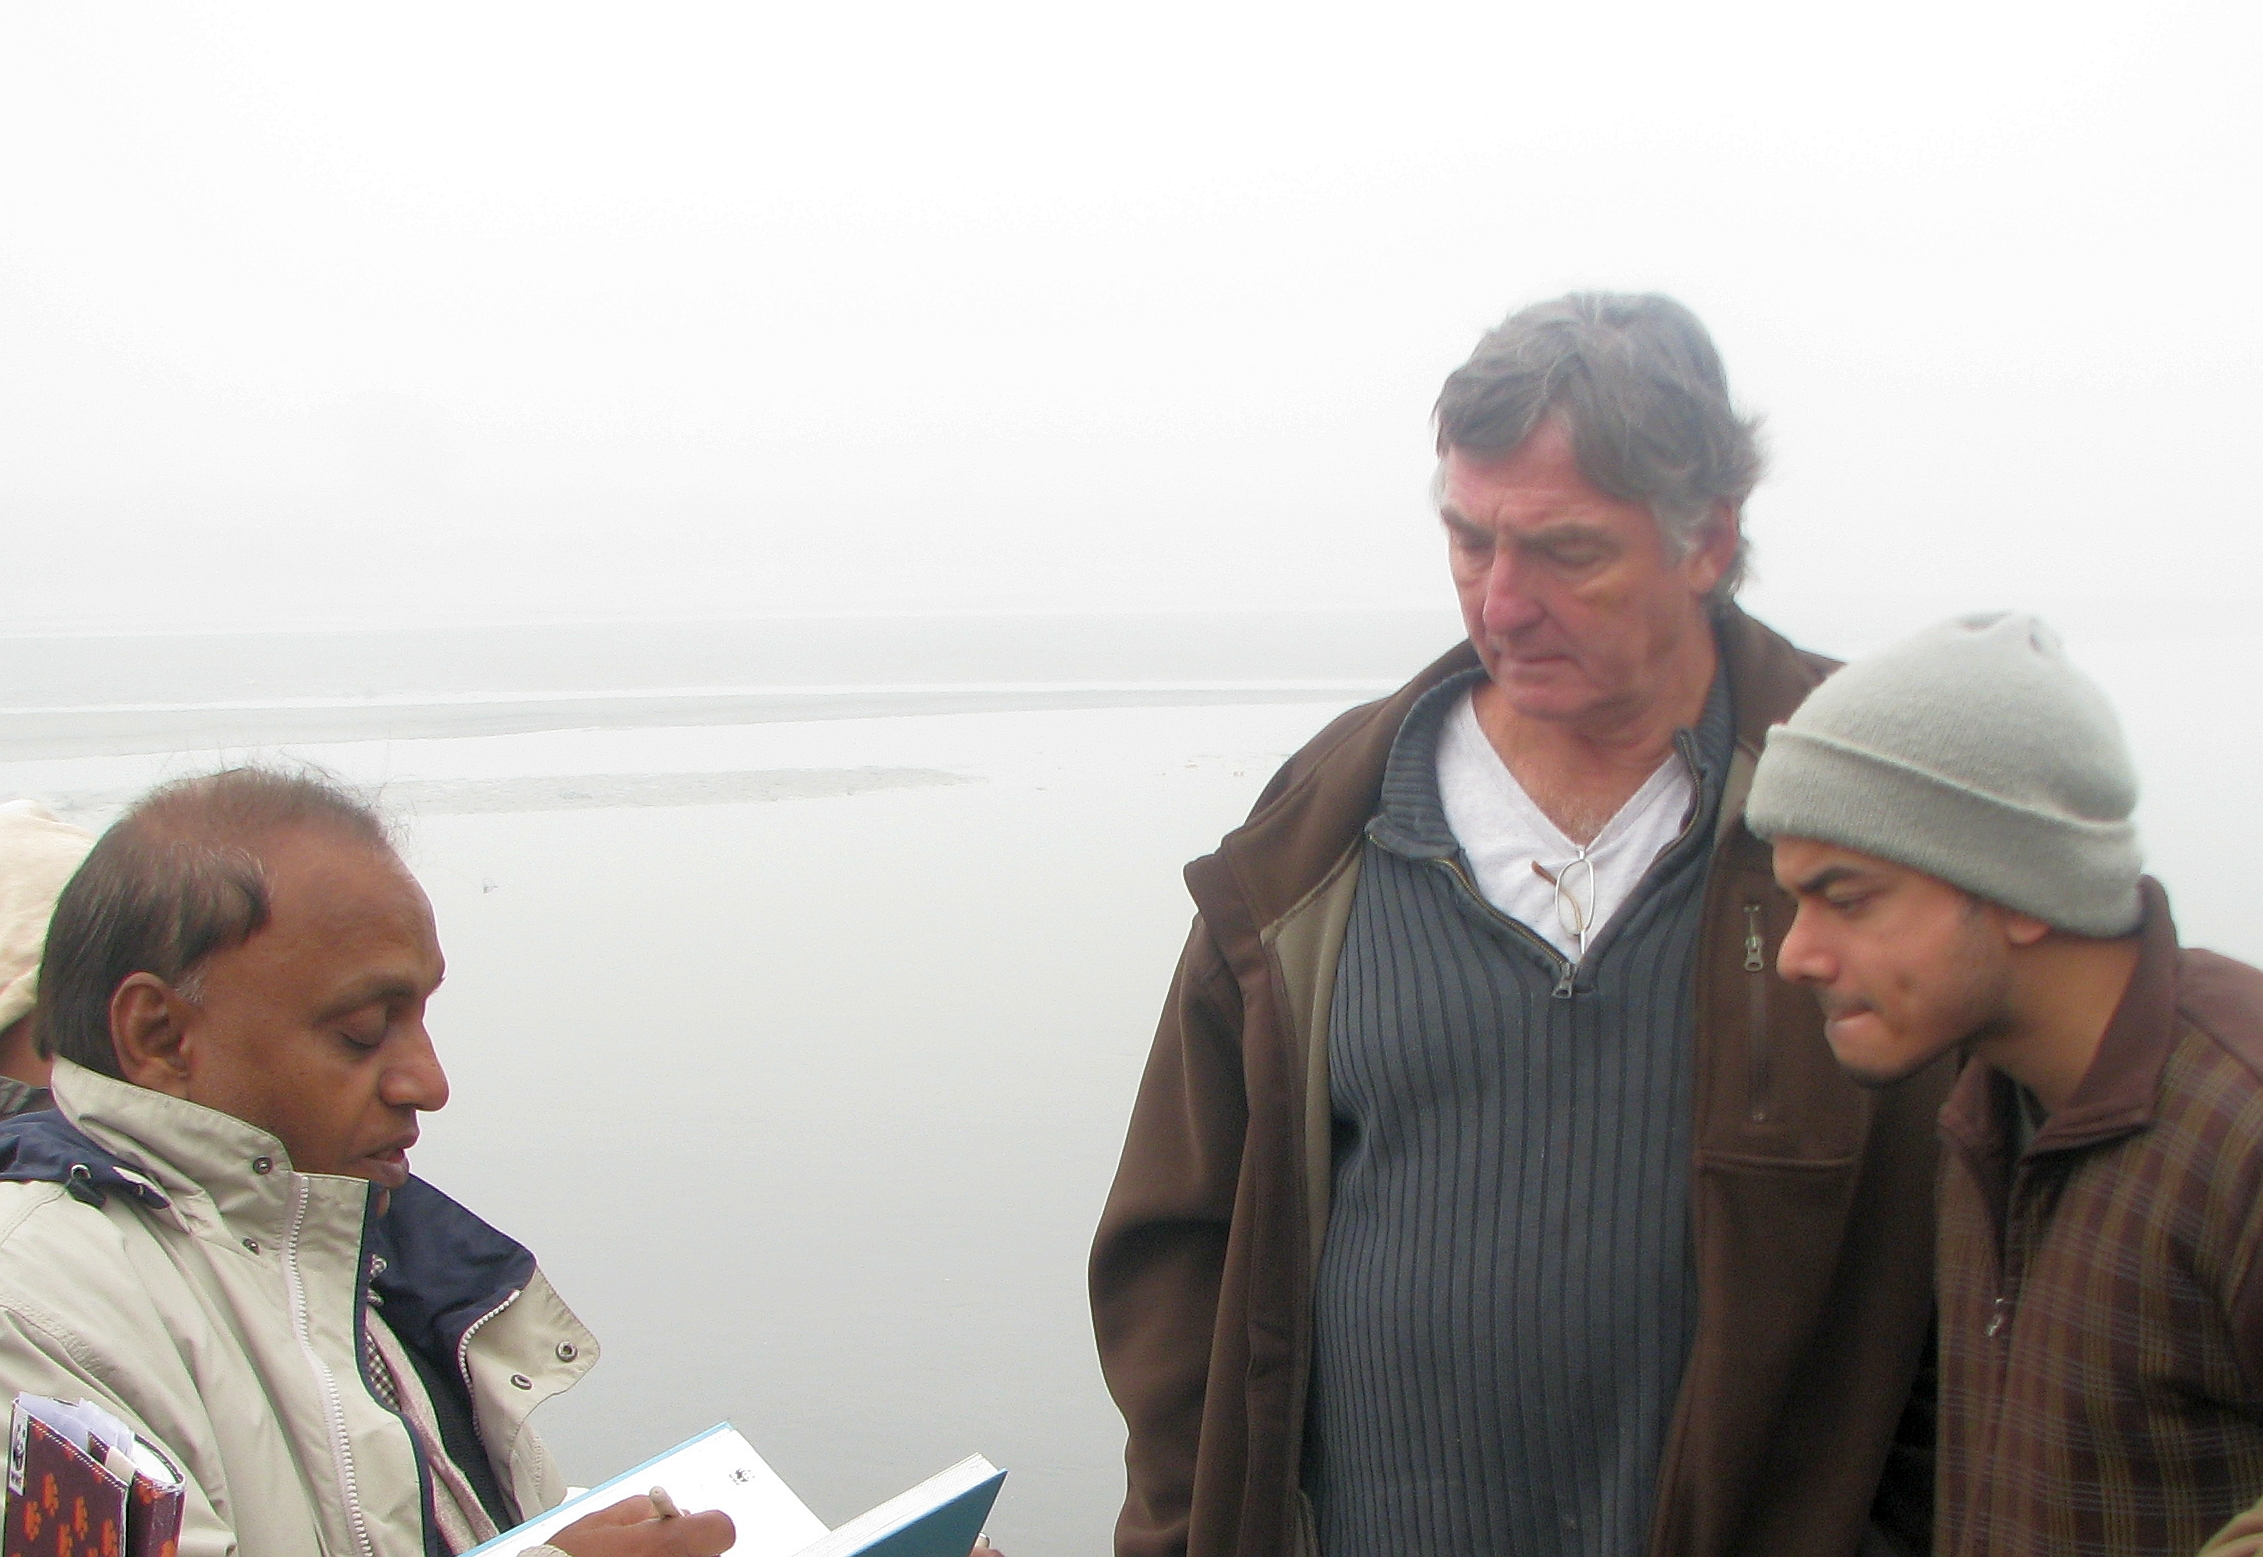 Prof. O'Keeffe (centre) discussing flows on the banks of the Ganga